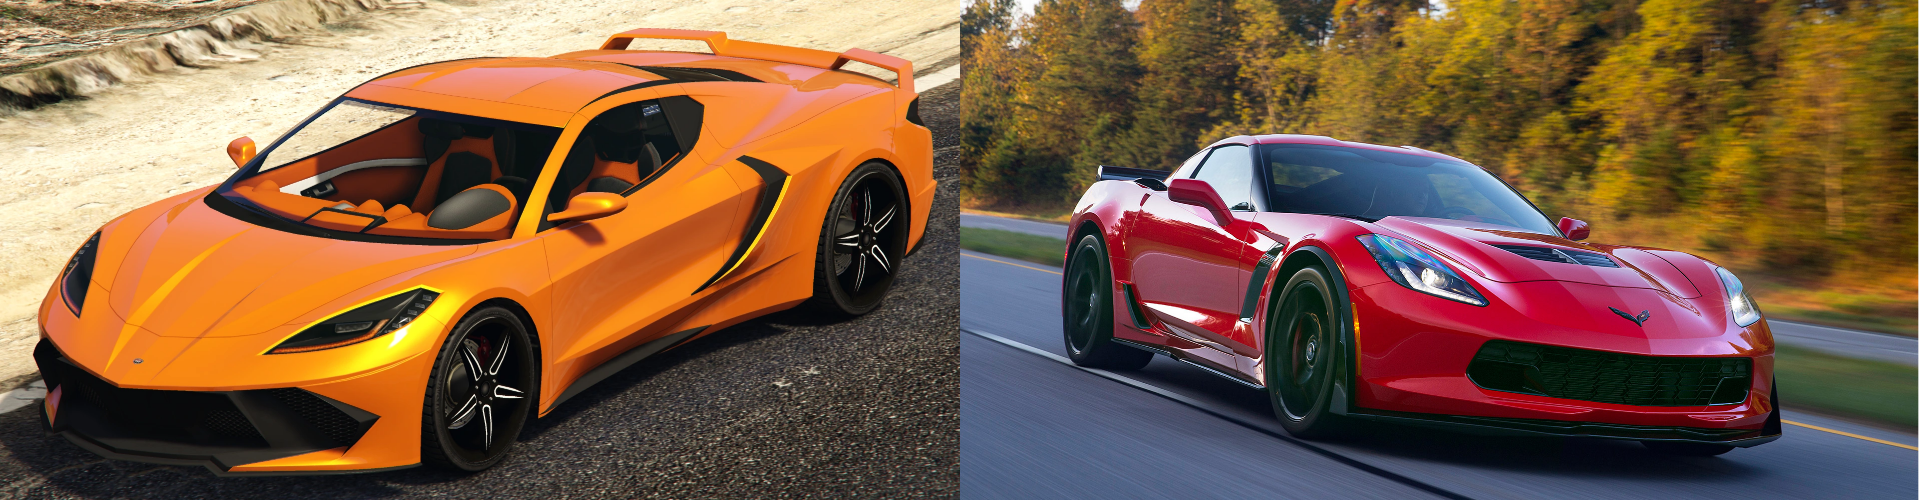 A side by side view of virtual and real Corvette.